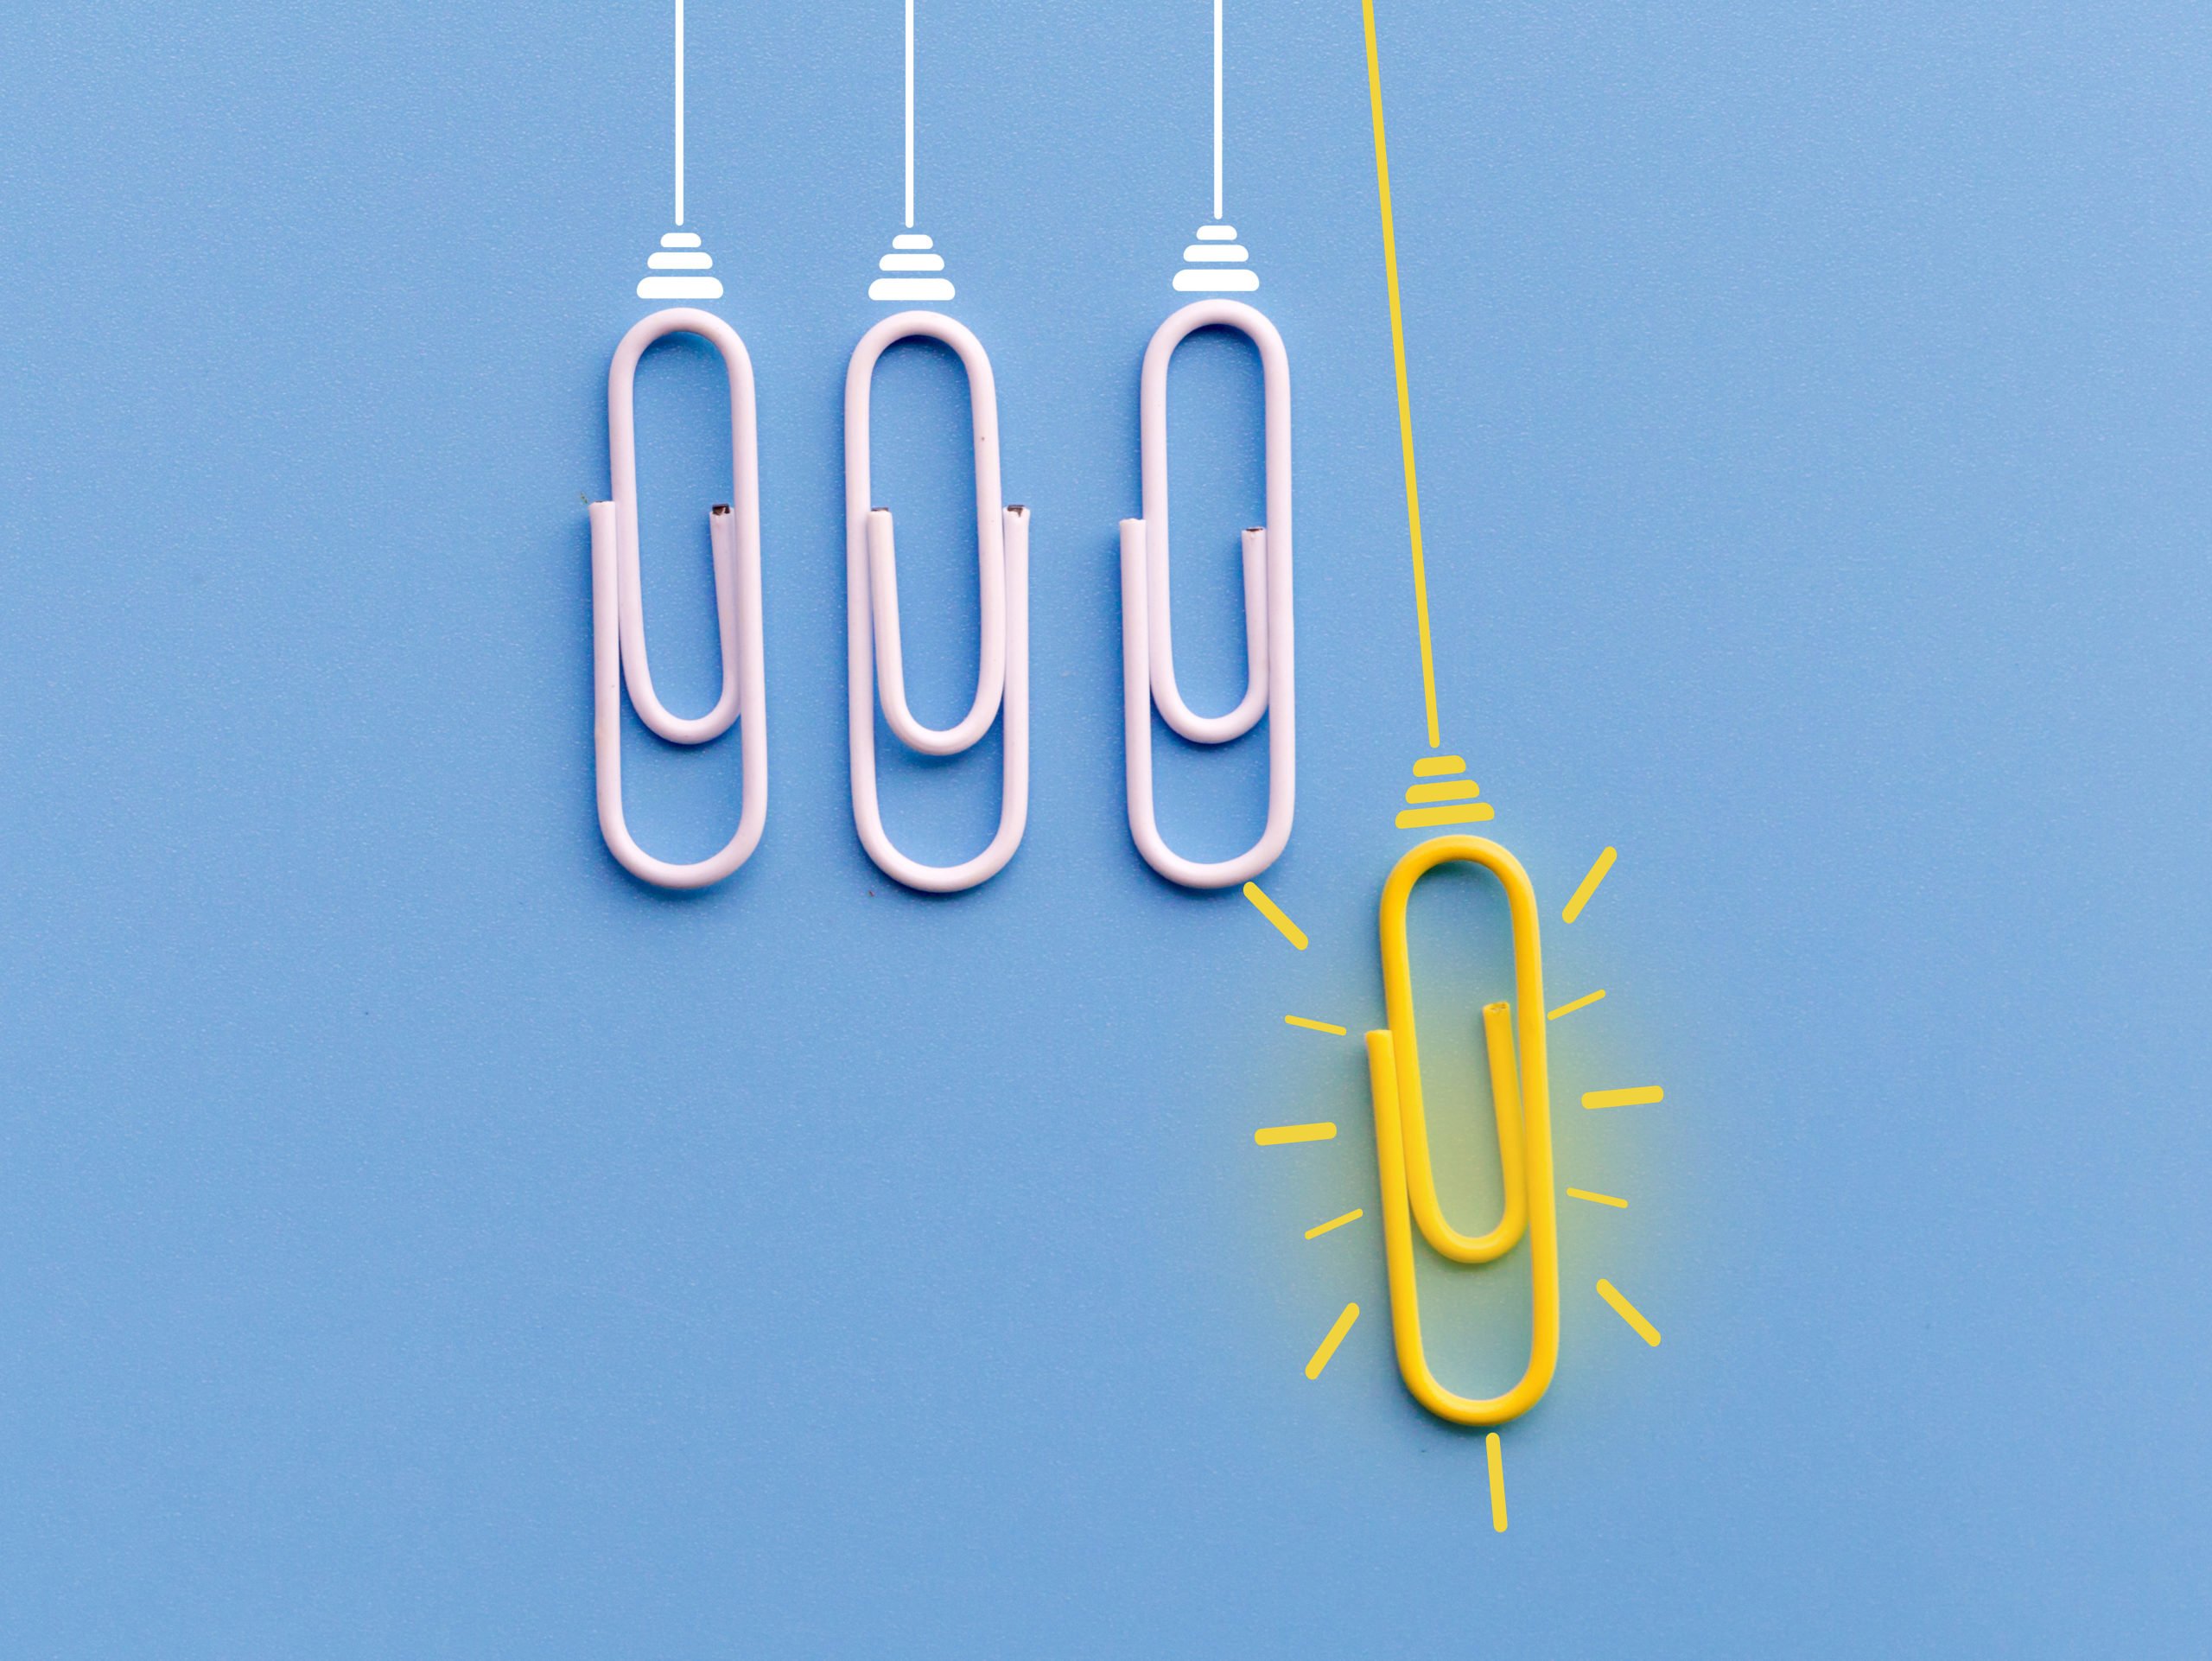 3 white paperclips and one yellow and longer paperclip